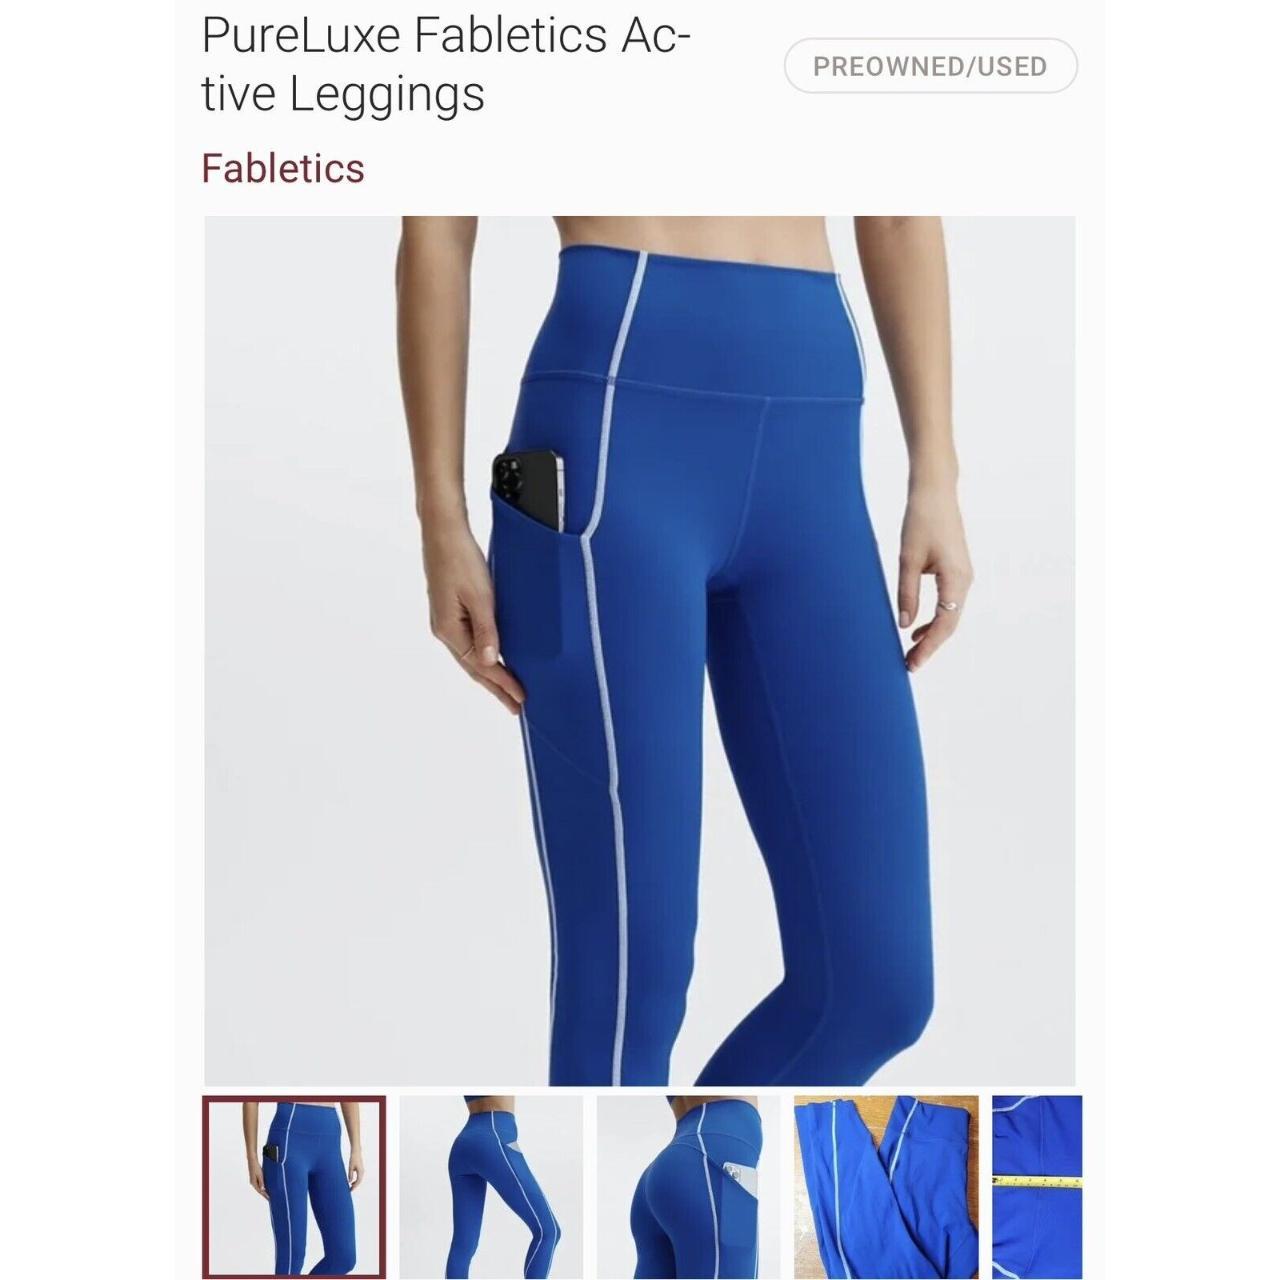 PureLuxe Made by Fabletics Leggings Women's Size Medium